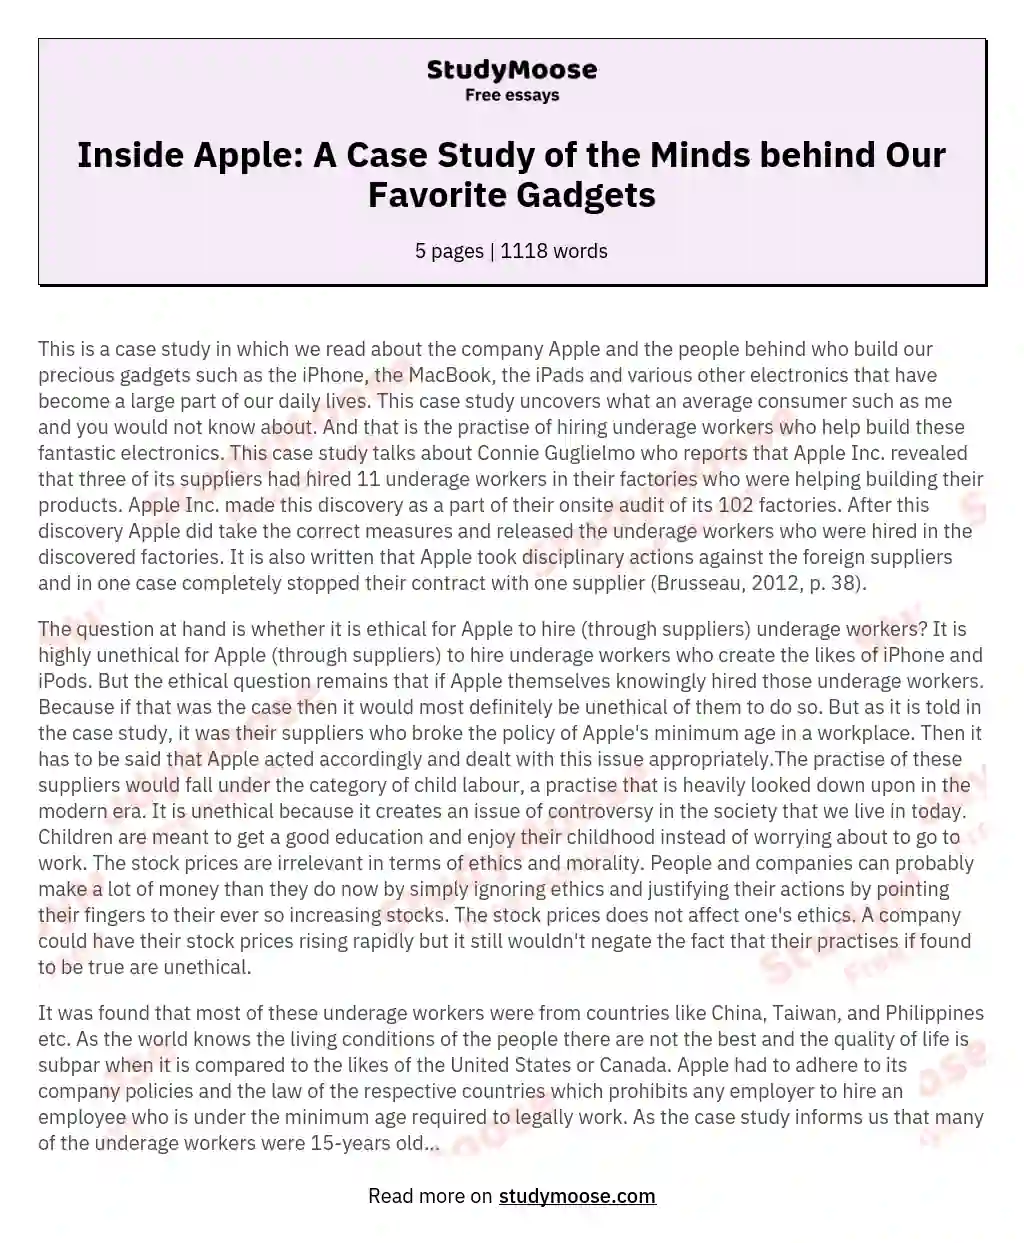 Inside Apple: A Case Study of the Minds behind Our Favorite Gadgets essay